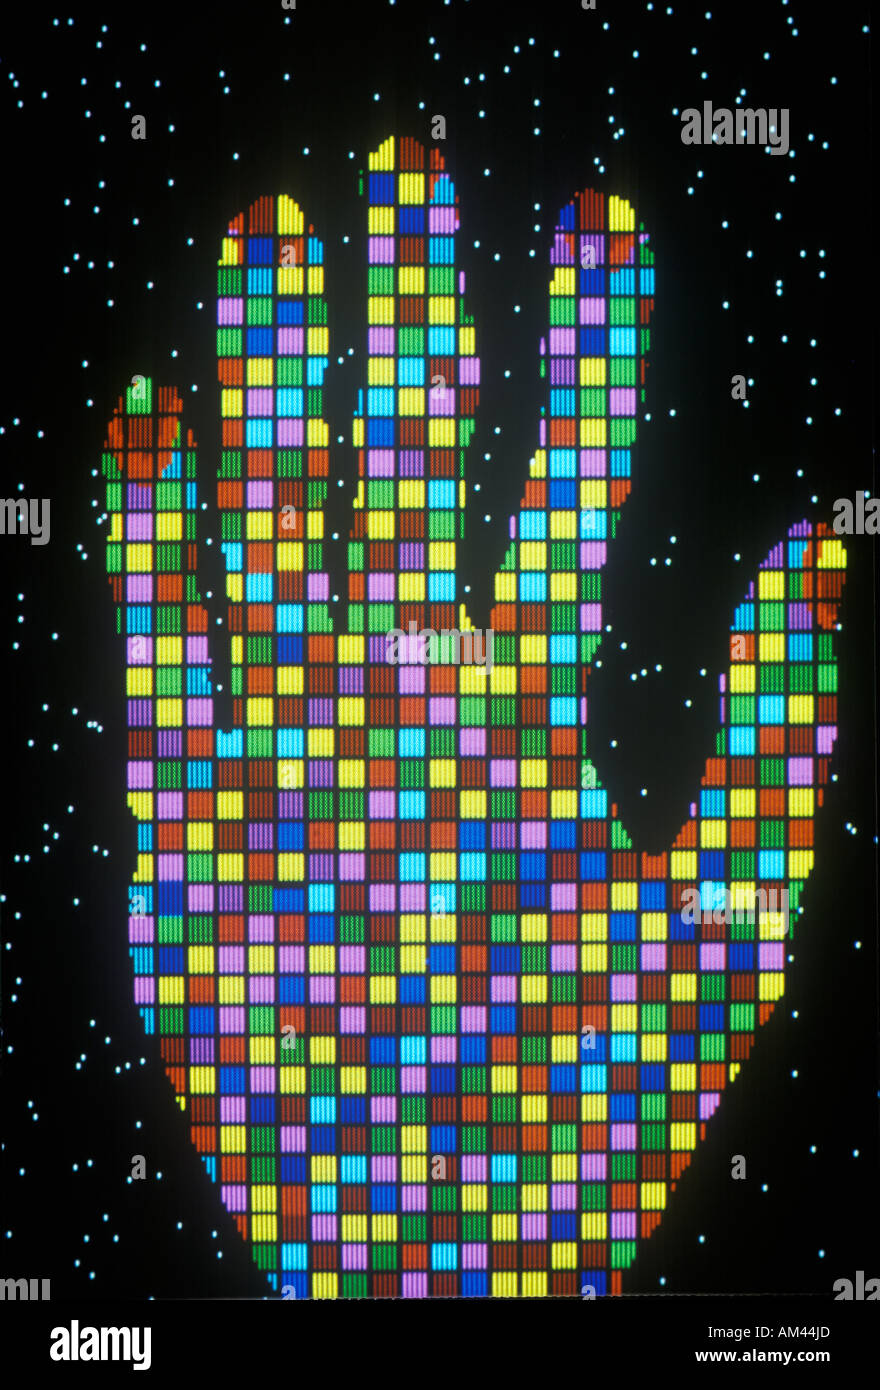 Early computer graphic of hand composed of colored lights Stock Photo